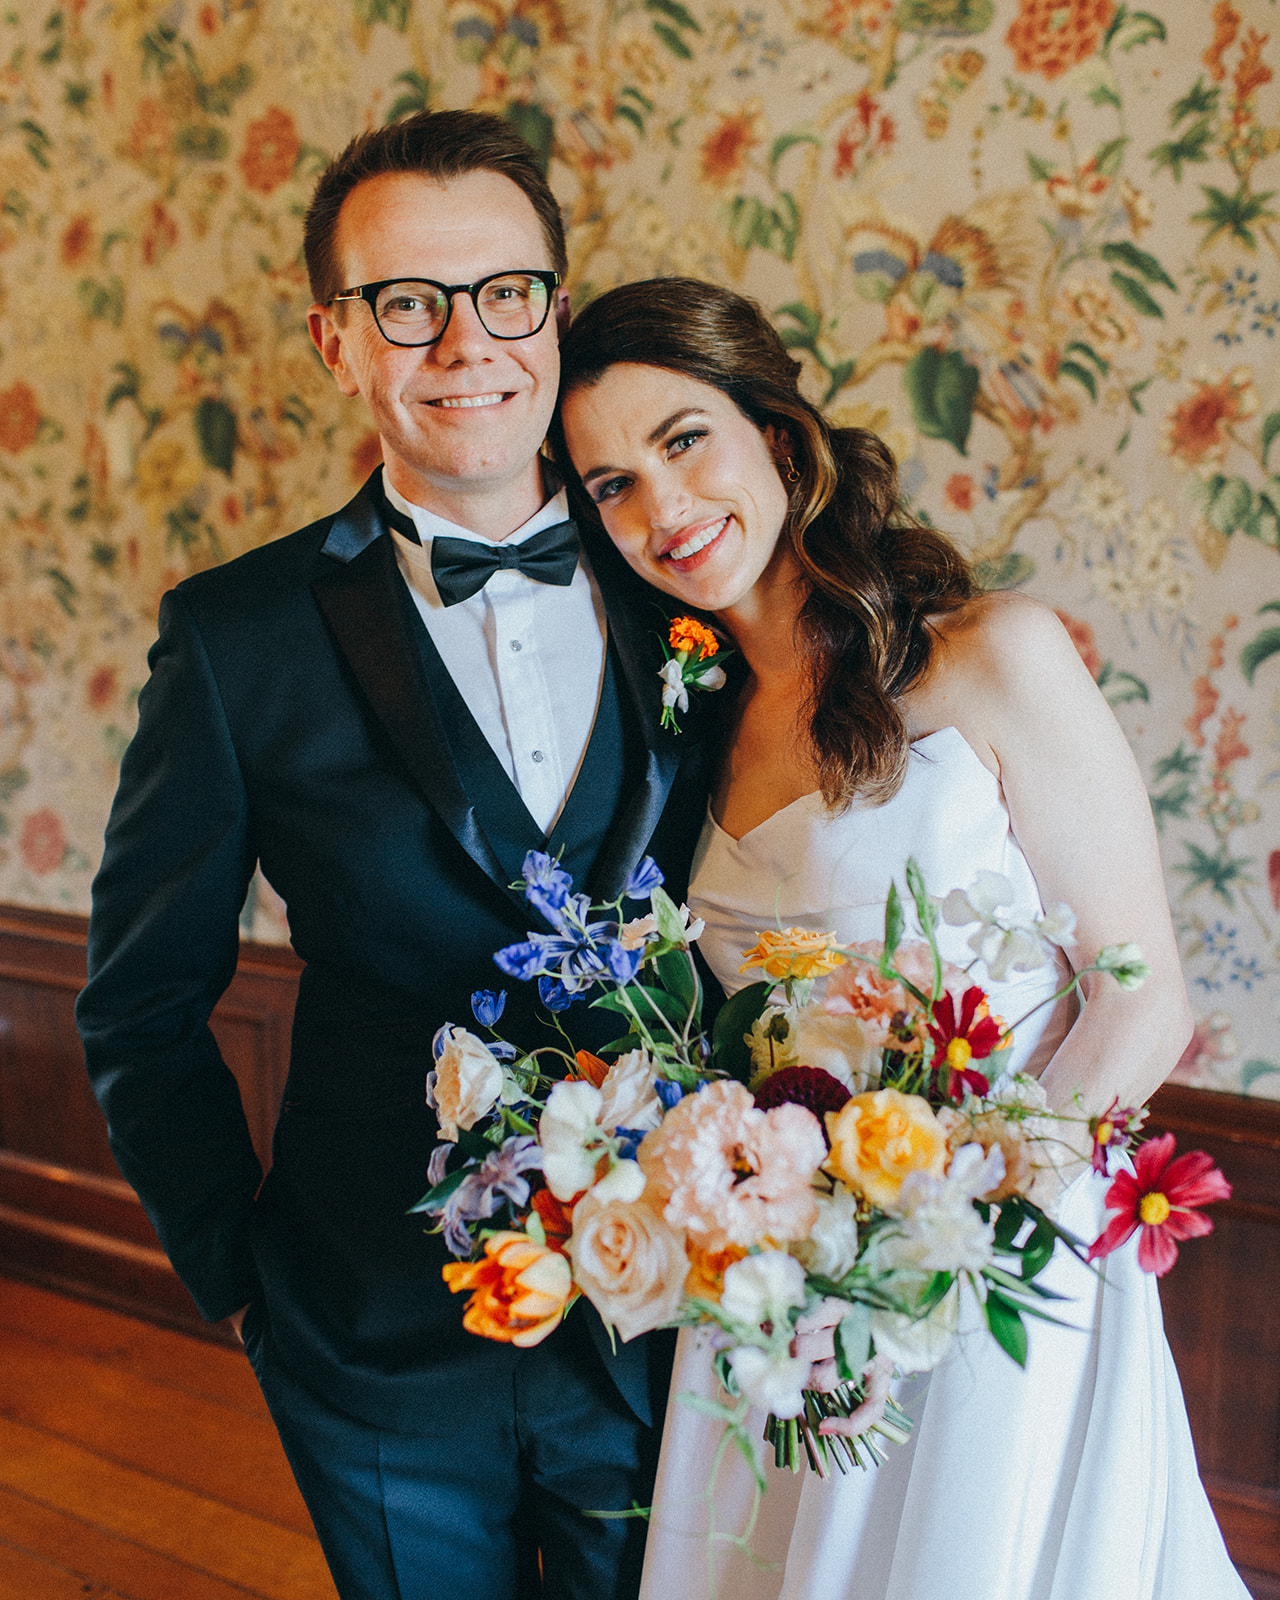 A couple has a colorful wedding day at West Michigan's famous Felt Mansion in Saugatuck, MI